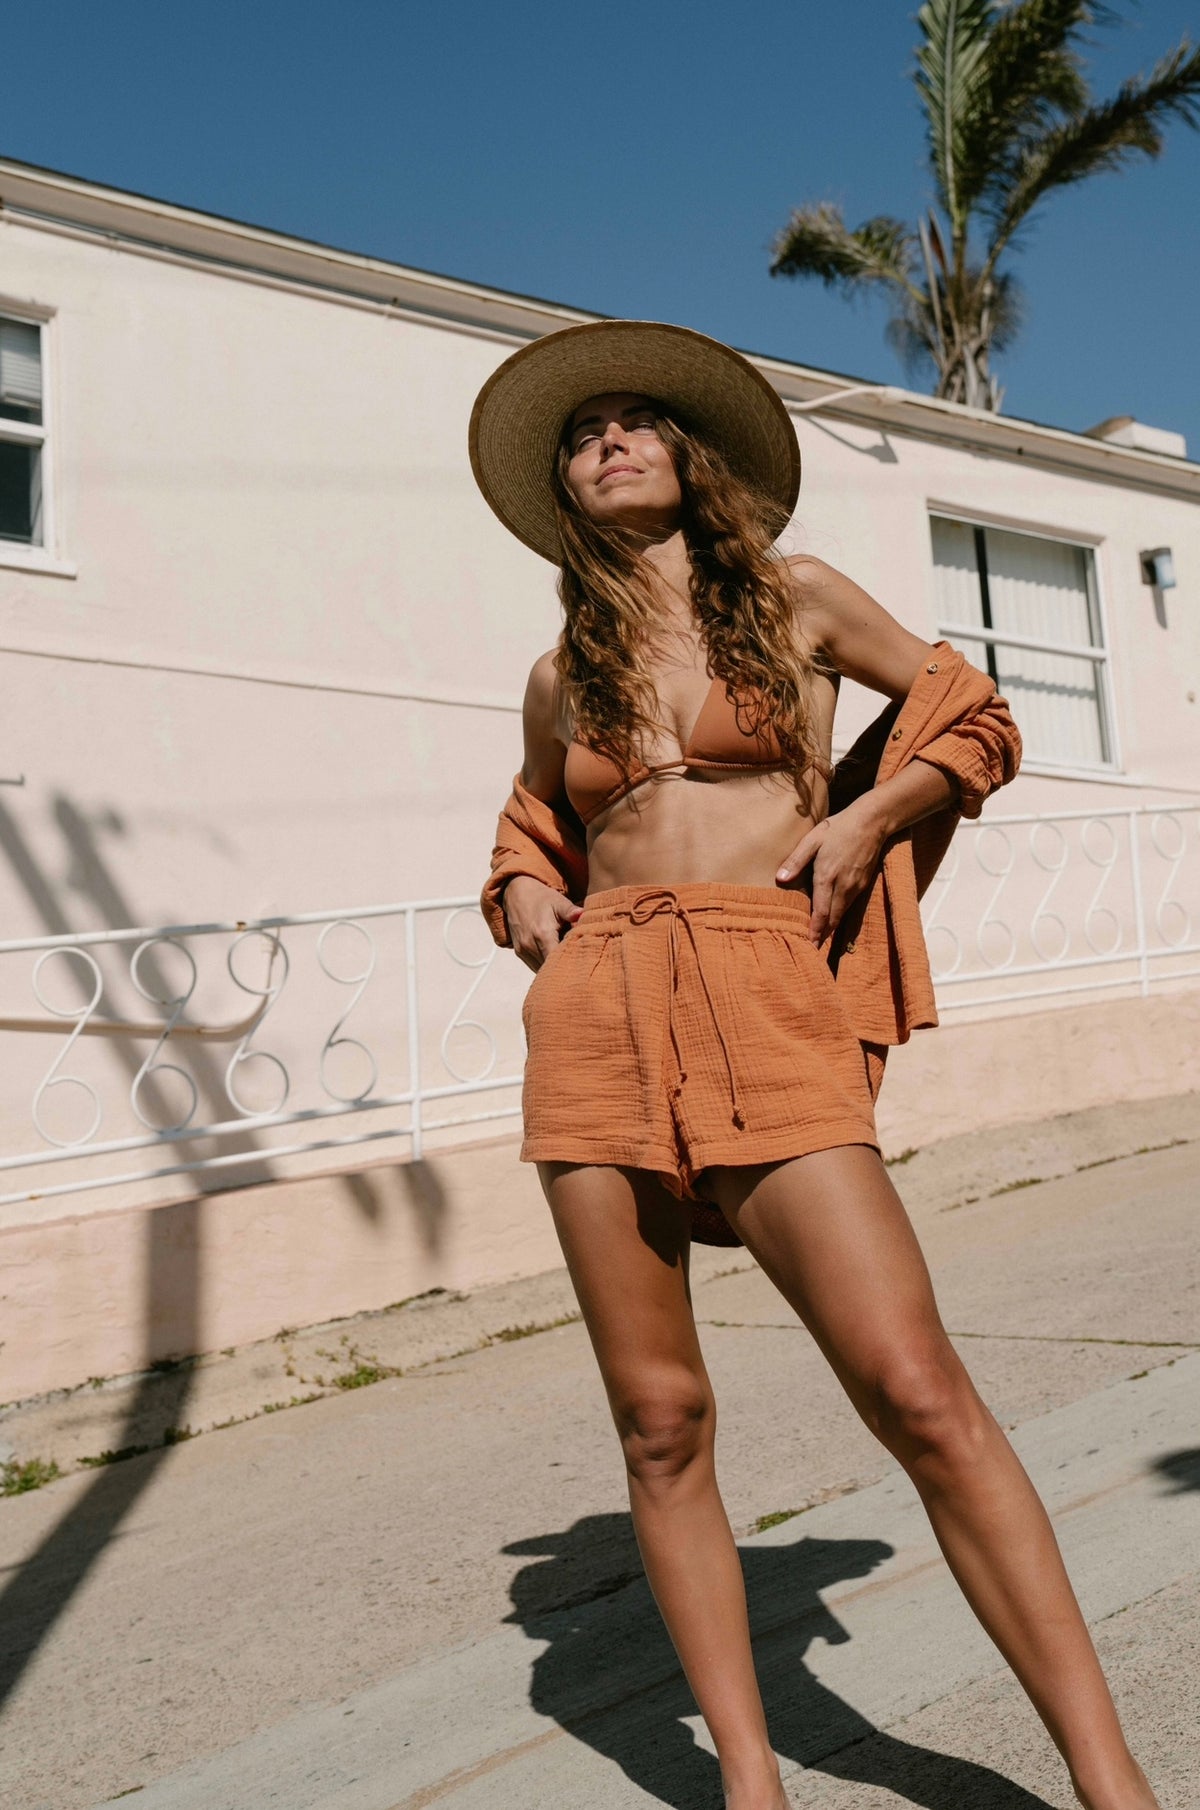 Day Tripper Shorts in Toffee